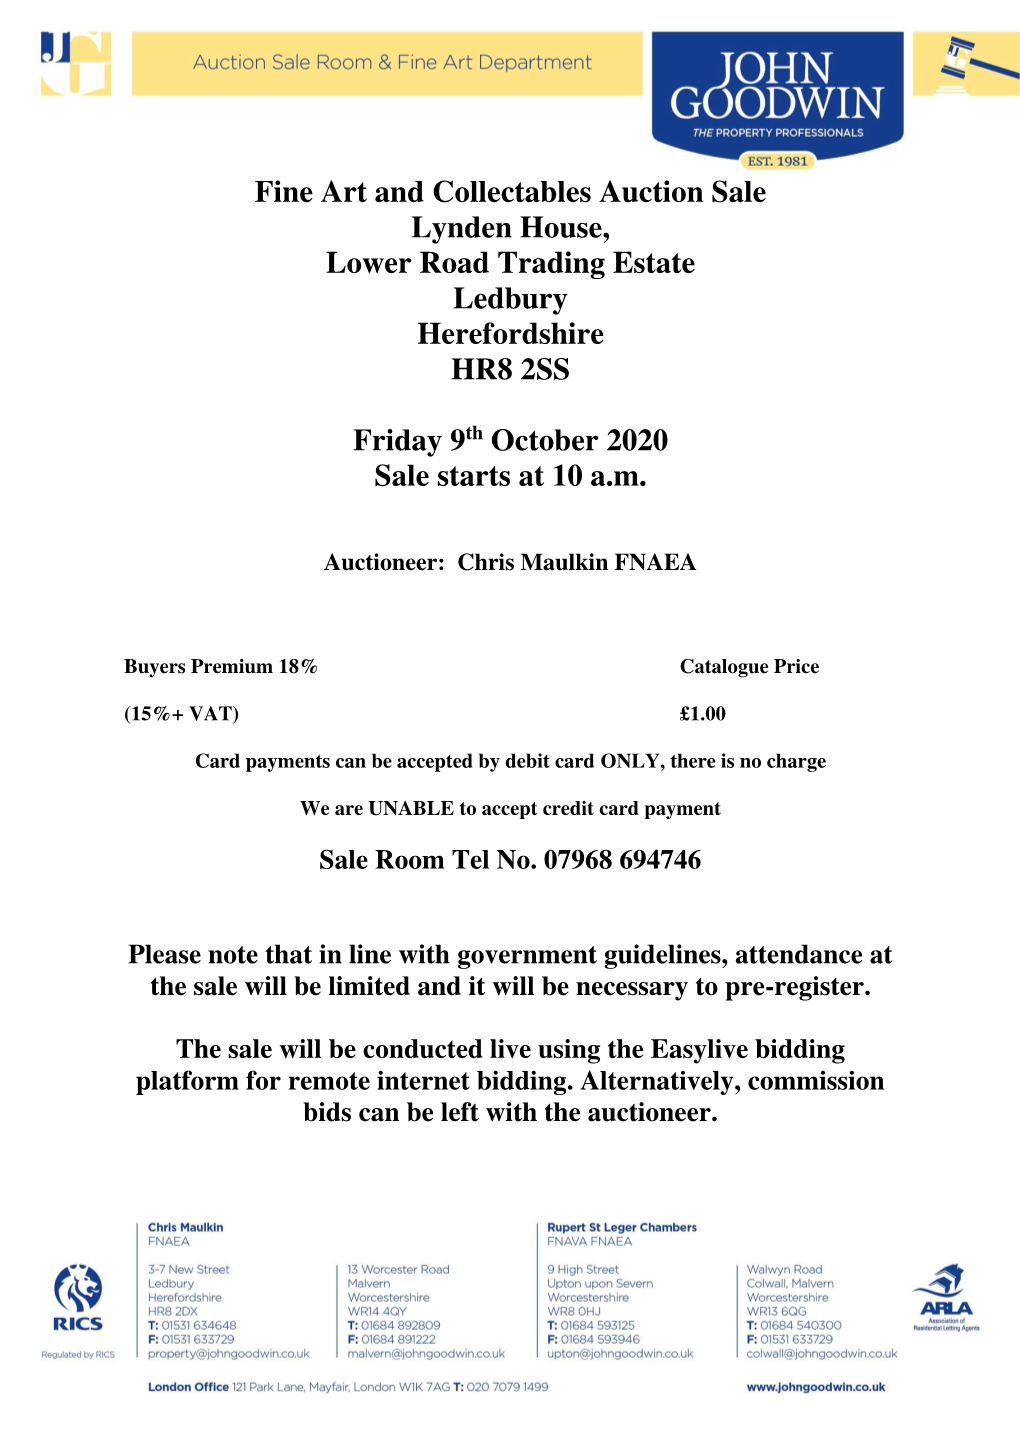 Fine Art and Collectables Auction Sale Lynden House, Lower Road Trading Estate Ledbury Herefordshire HR8 2SS